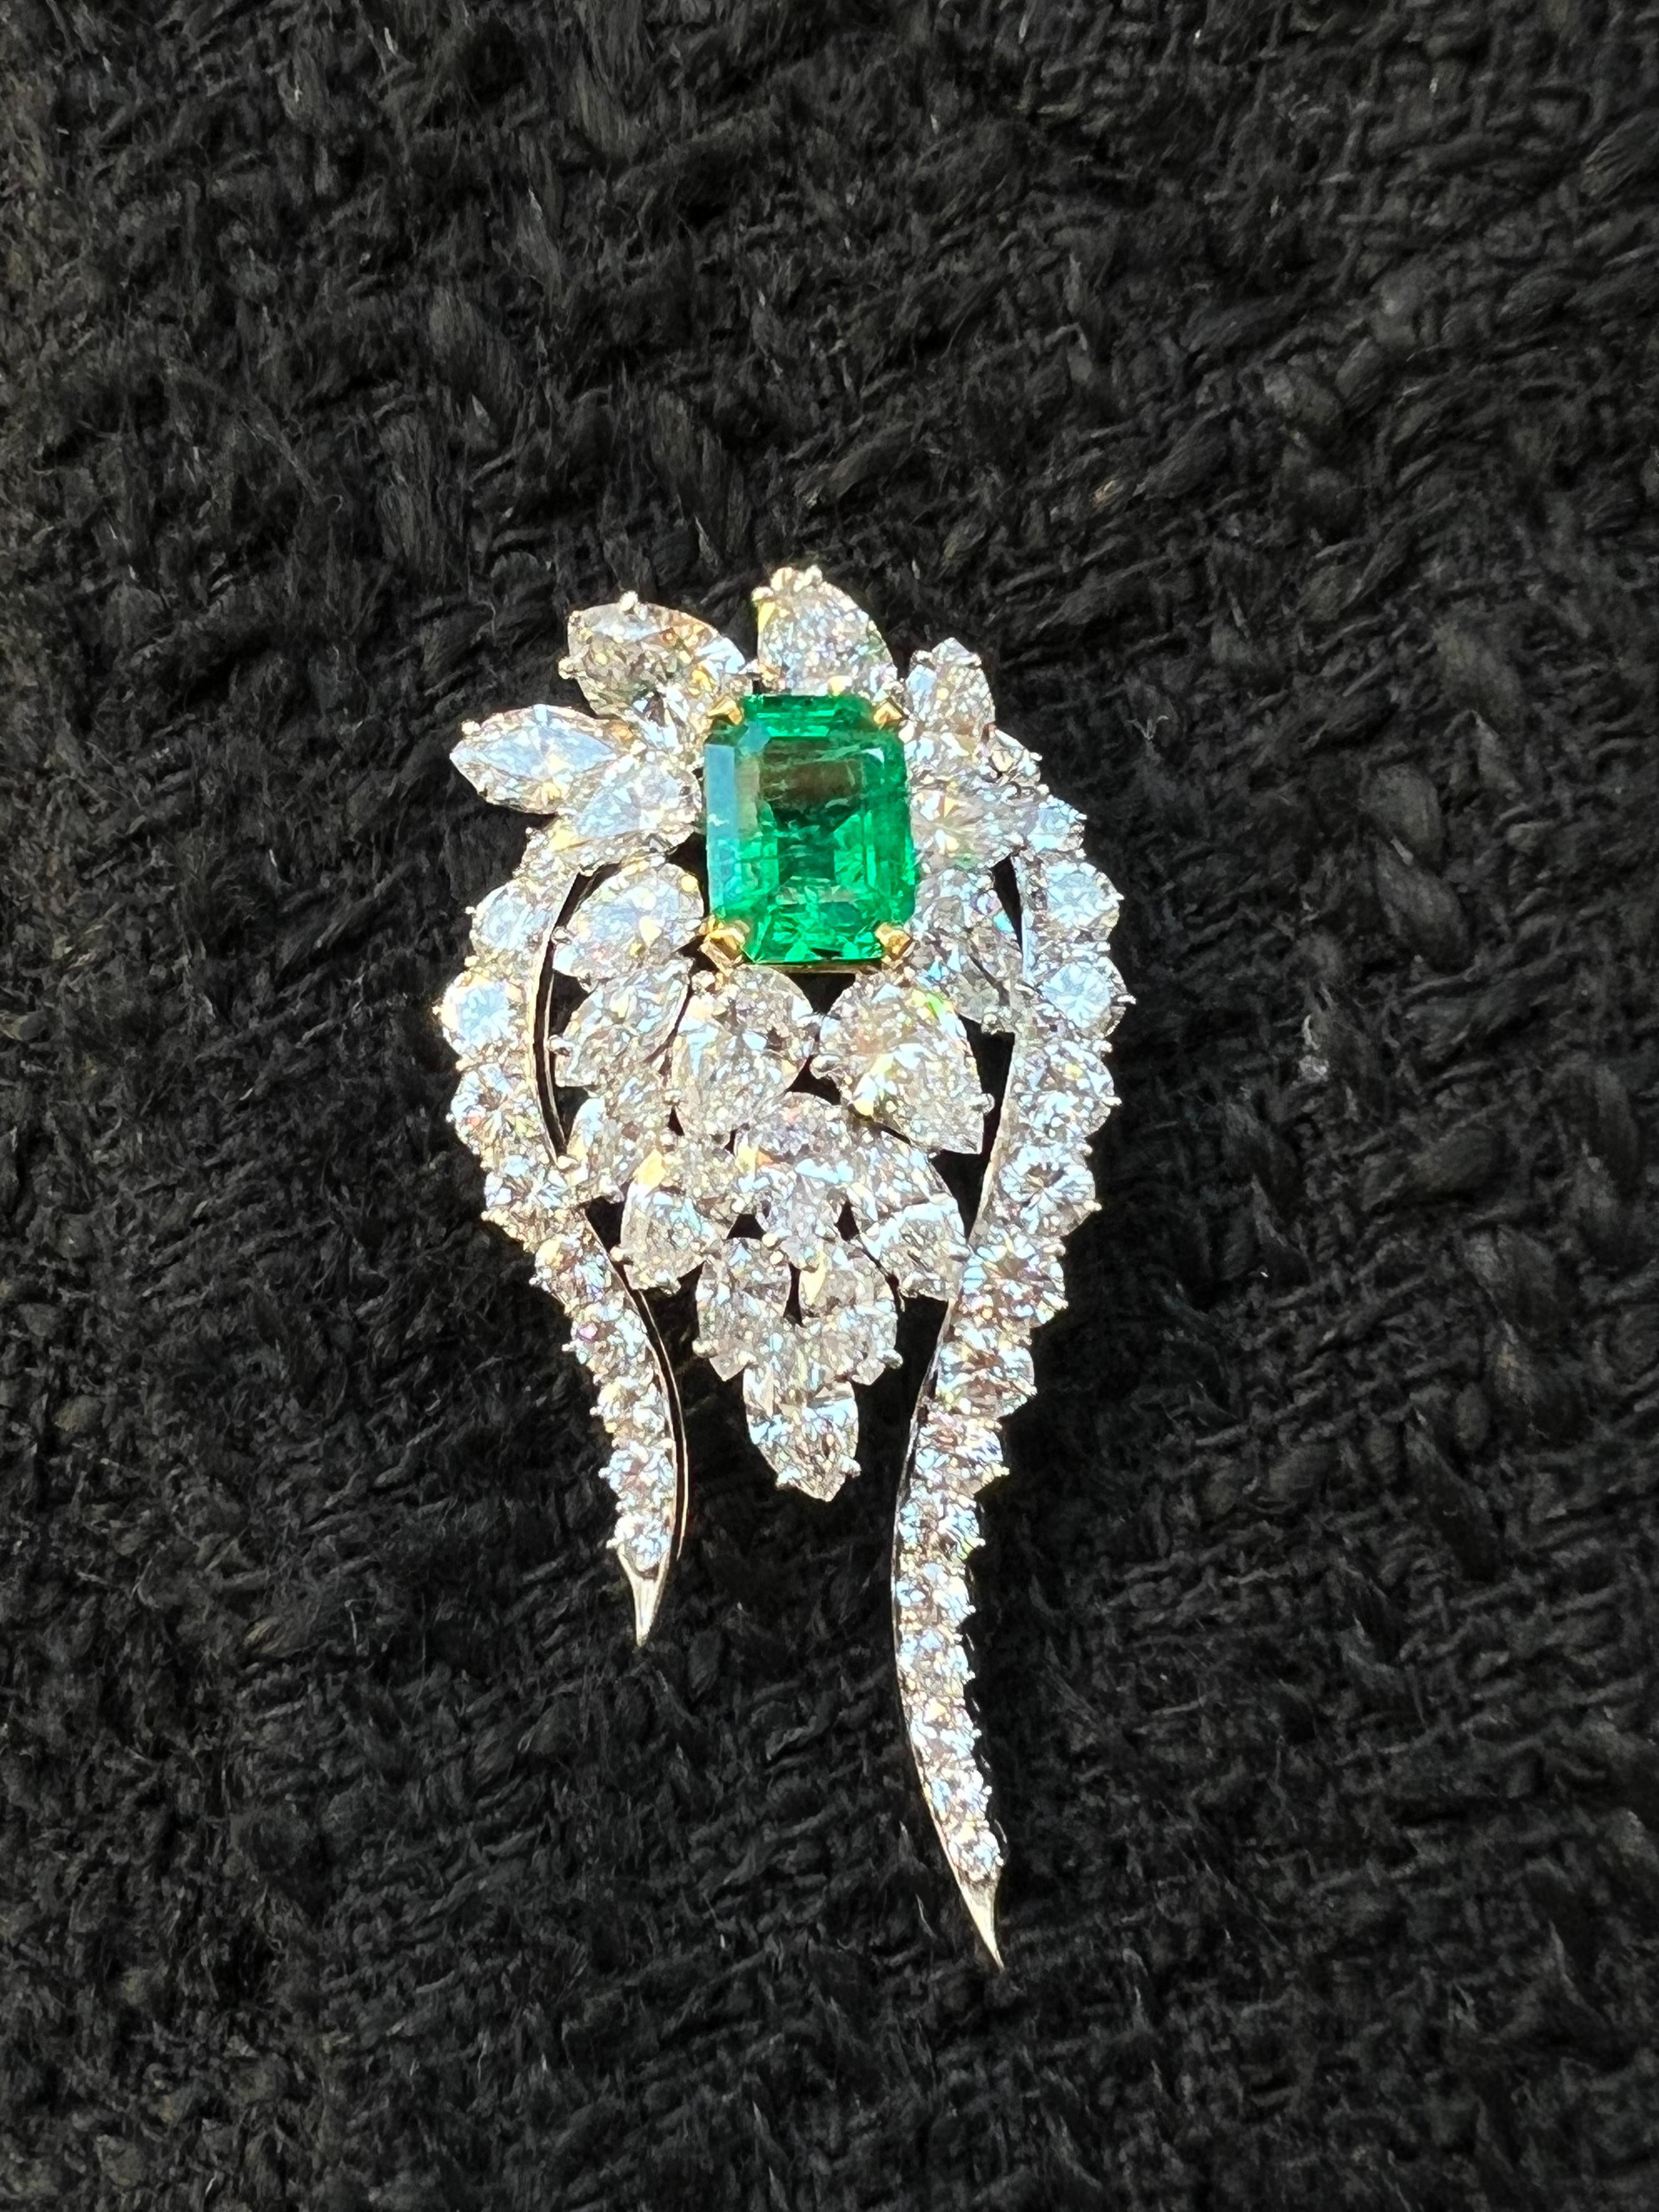 classy brooch/pendent by Bulgari in the 1930-1940s.
colorful, elegant and wearable . the brooch/pendent is made of 18 karat white gold and features a gorgeous 4 carat Colombian emerald accompanied with a AGL emerald origin report ( last photo ) and